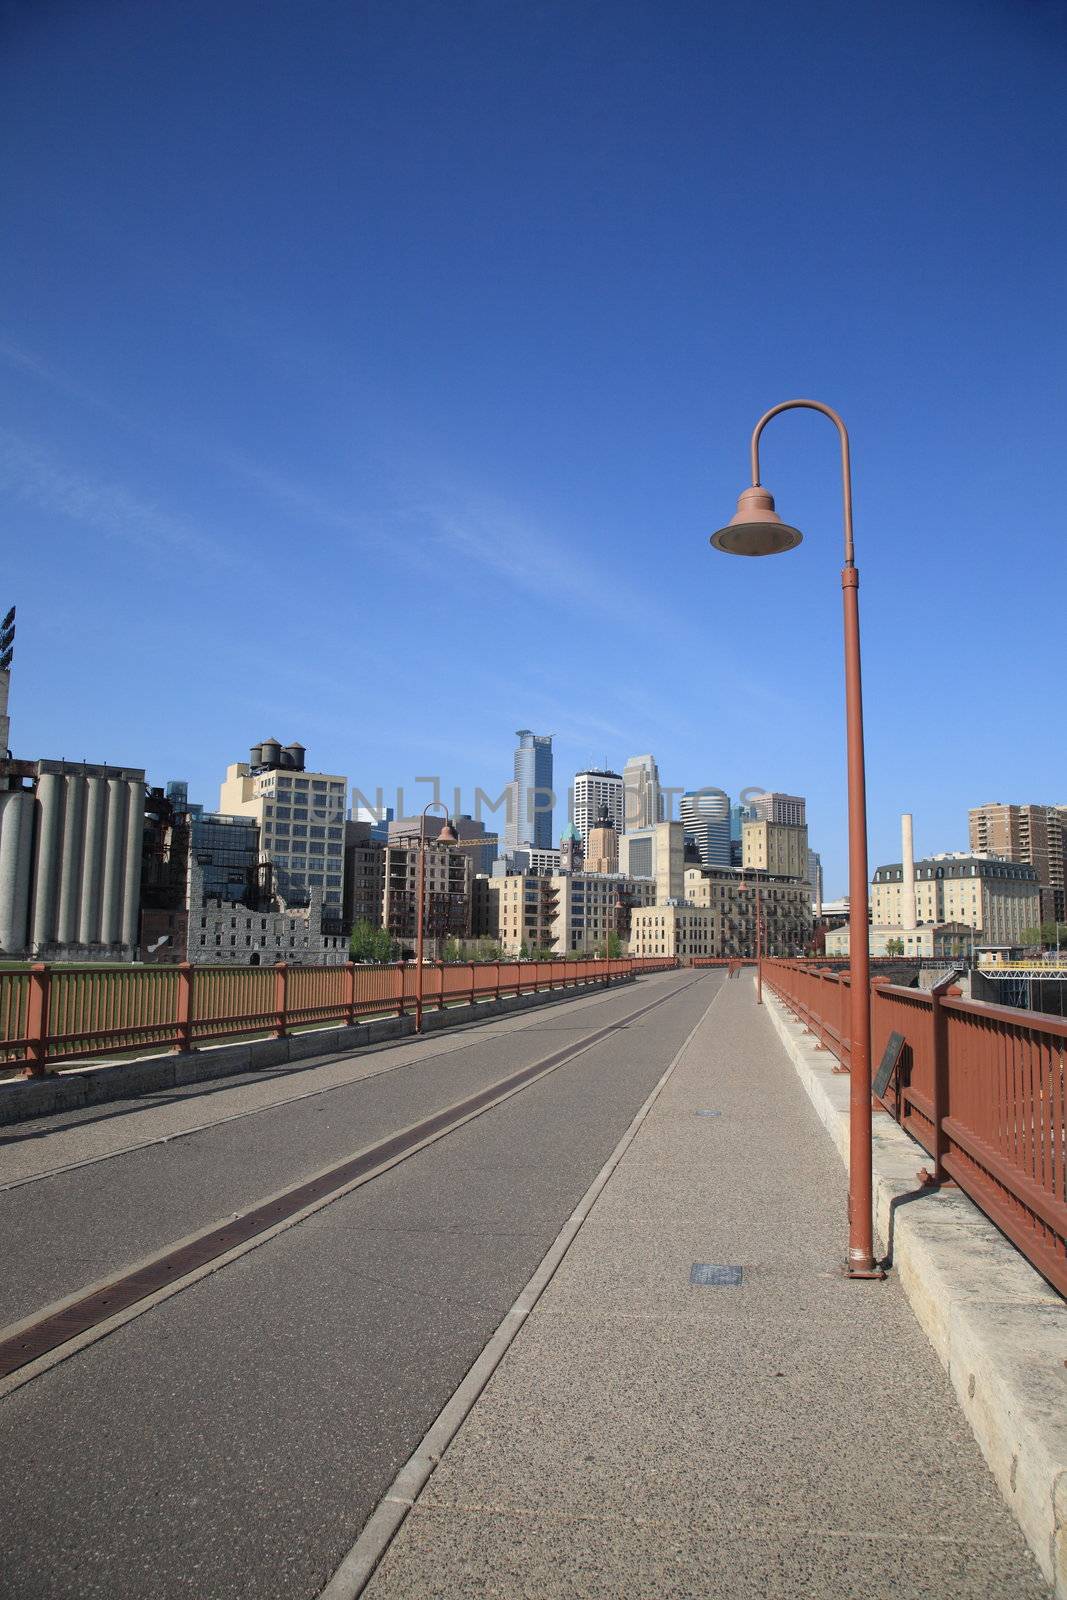 Skyscrapers and old fashioned light poles from Stone Arch Bridge